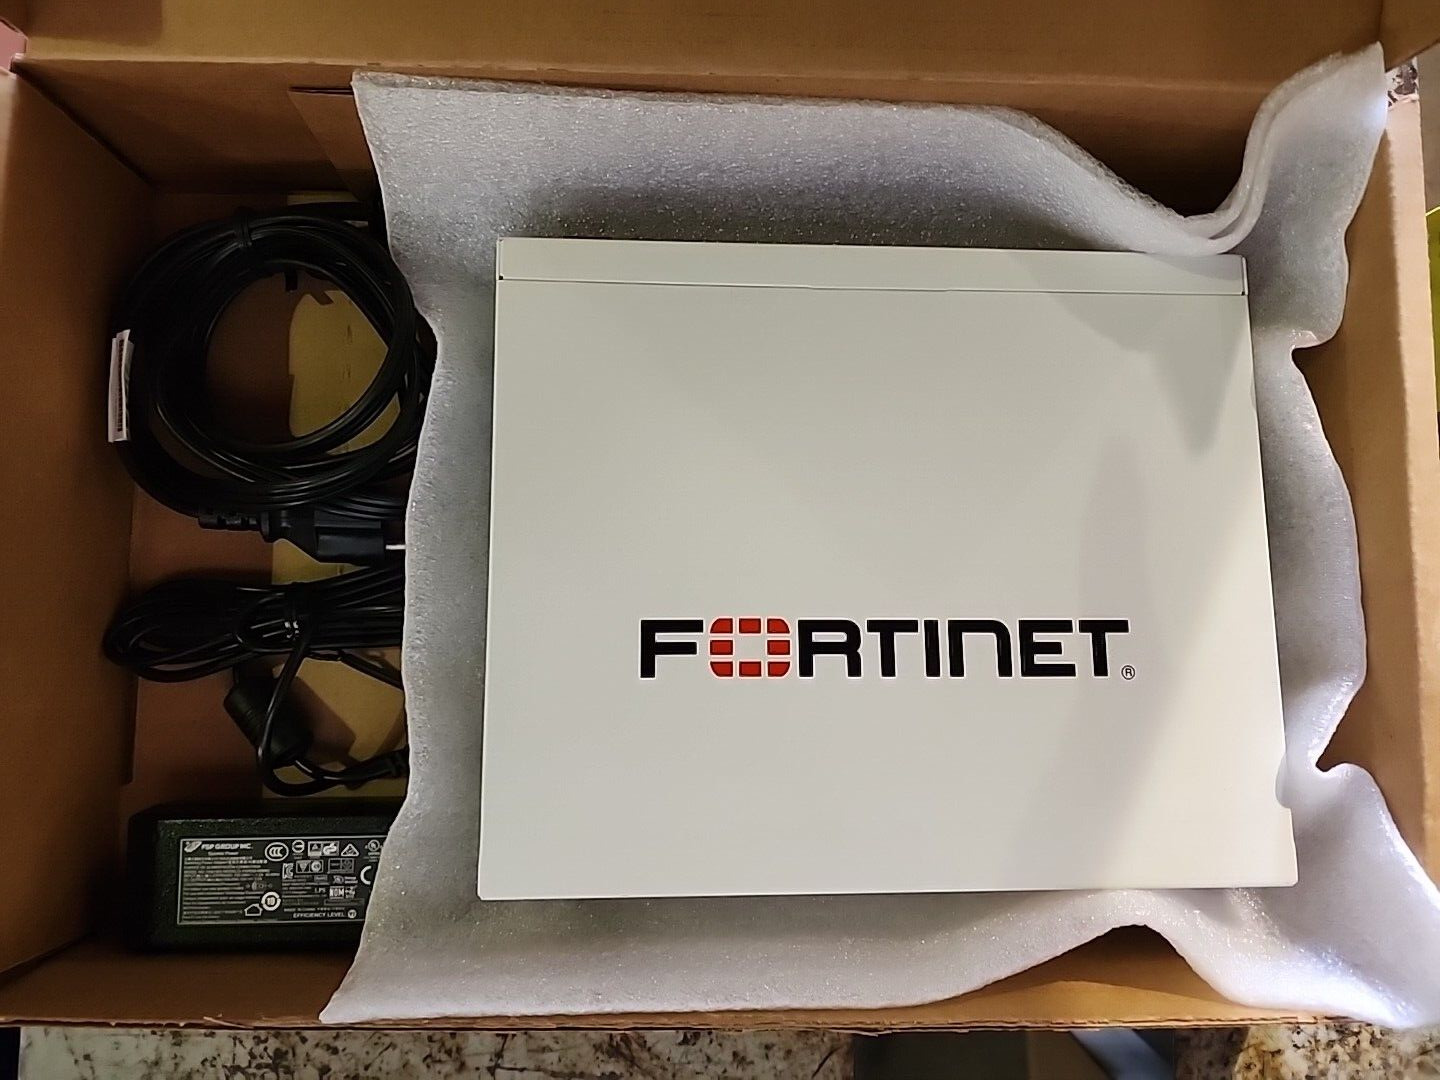 Fortinet FortiGate FG-81E Network Security Firewall LAN Port Switch w/ Adapter